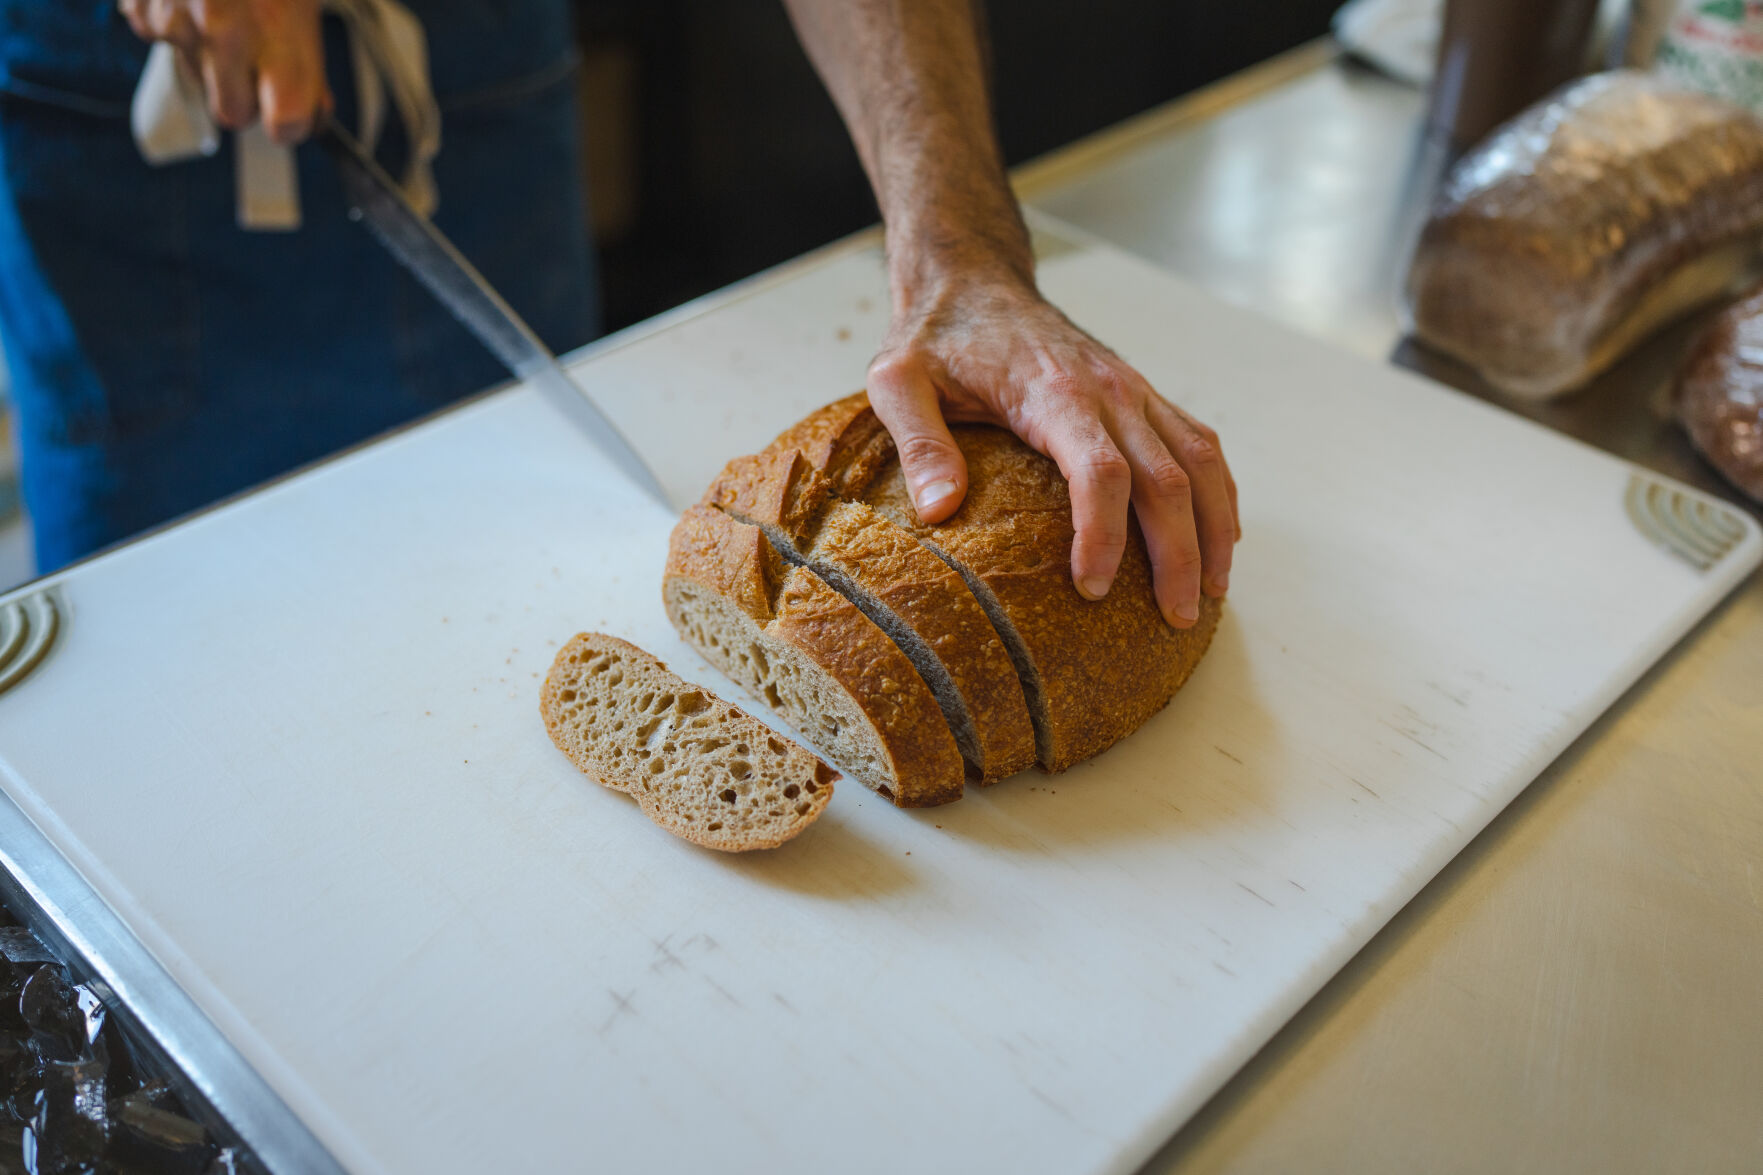 Josh Novack, sous chef at Winslow’s Table, uses science to inform his passion for baking bread